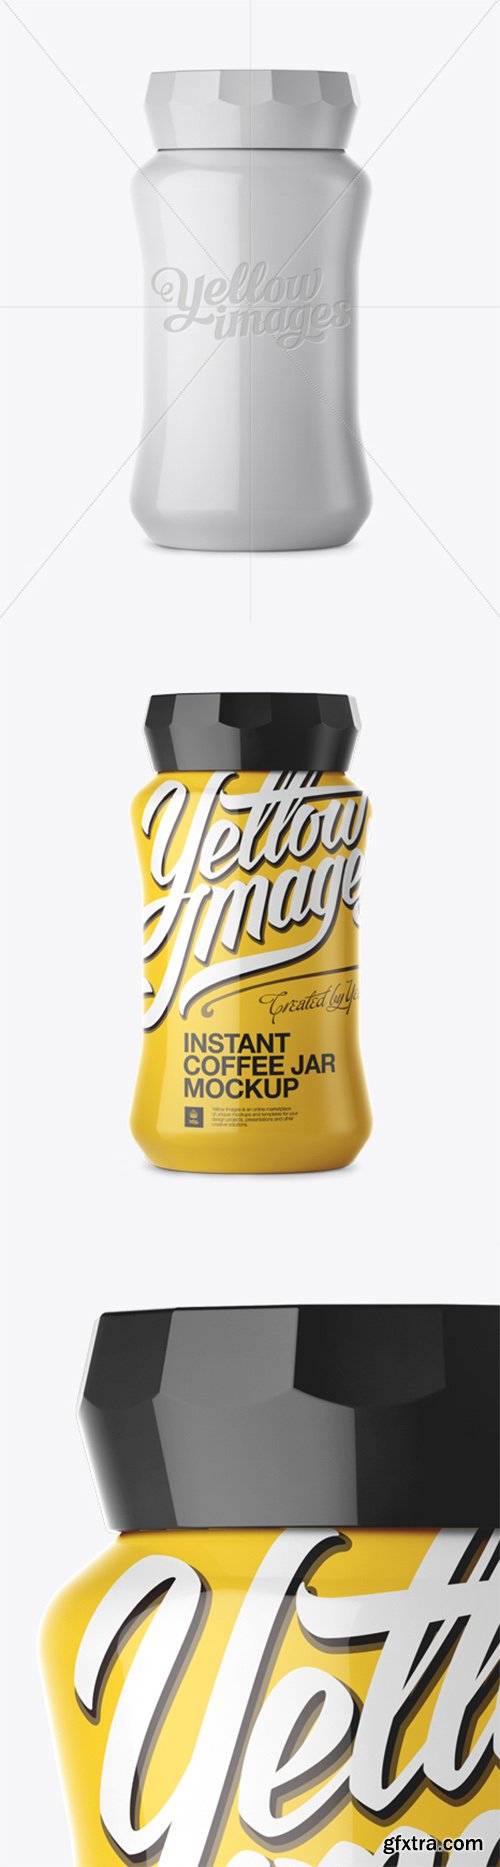 Instant Coffee Jar With Gloss Finish Mockup 13614